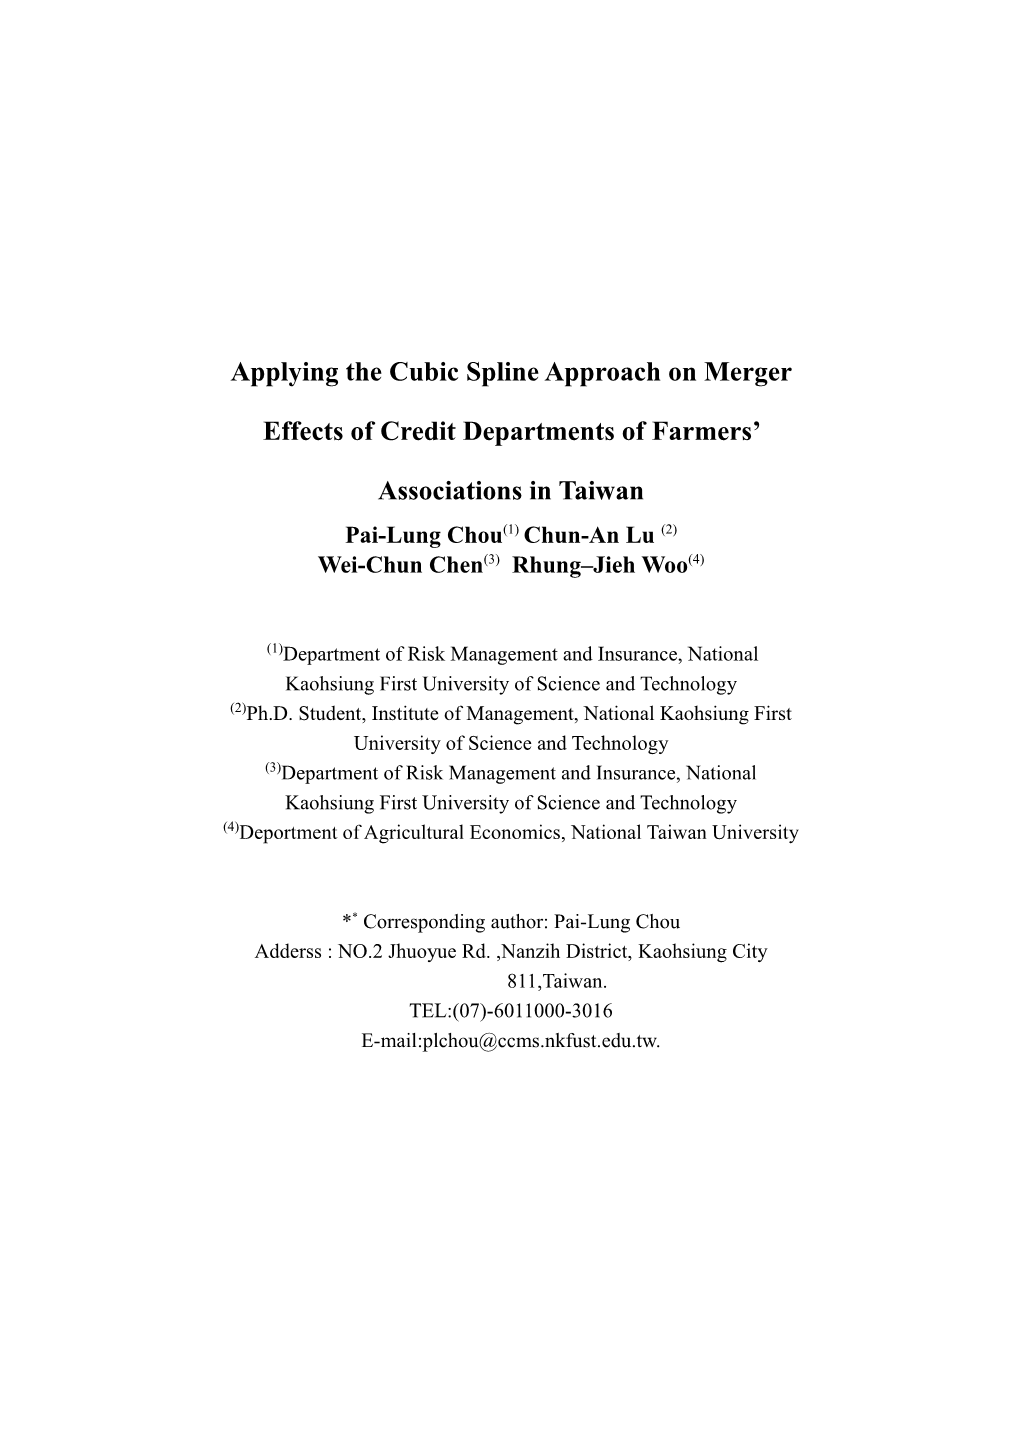 Applying Thecubic Spline Approach on Merger Effects of Credit Departments of Farmers